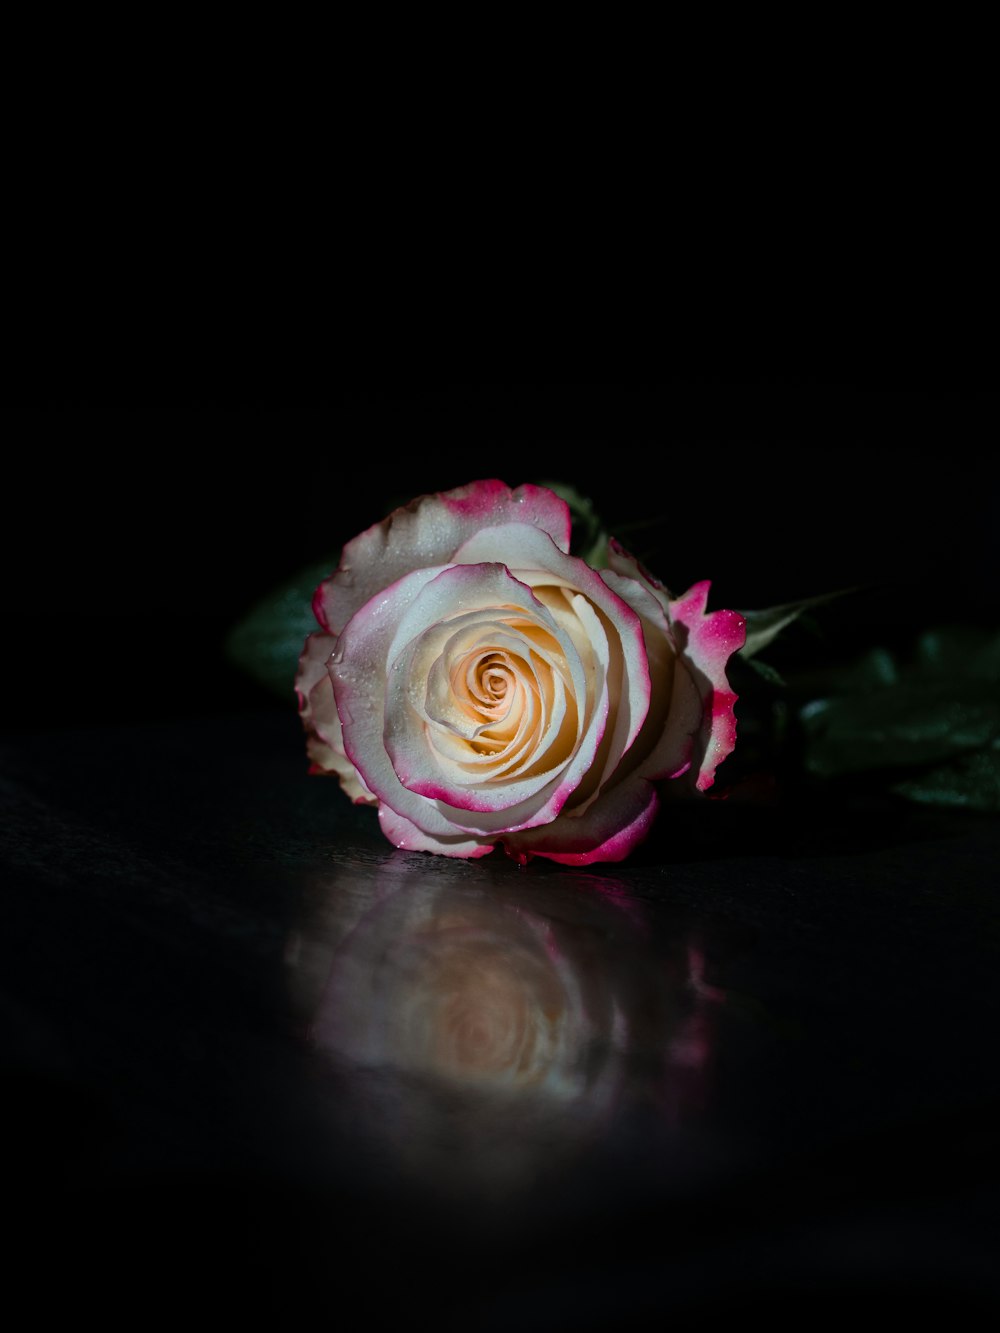 pink and white rose in black background